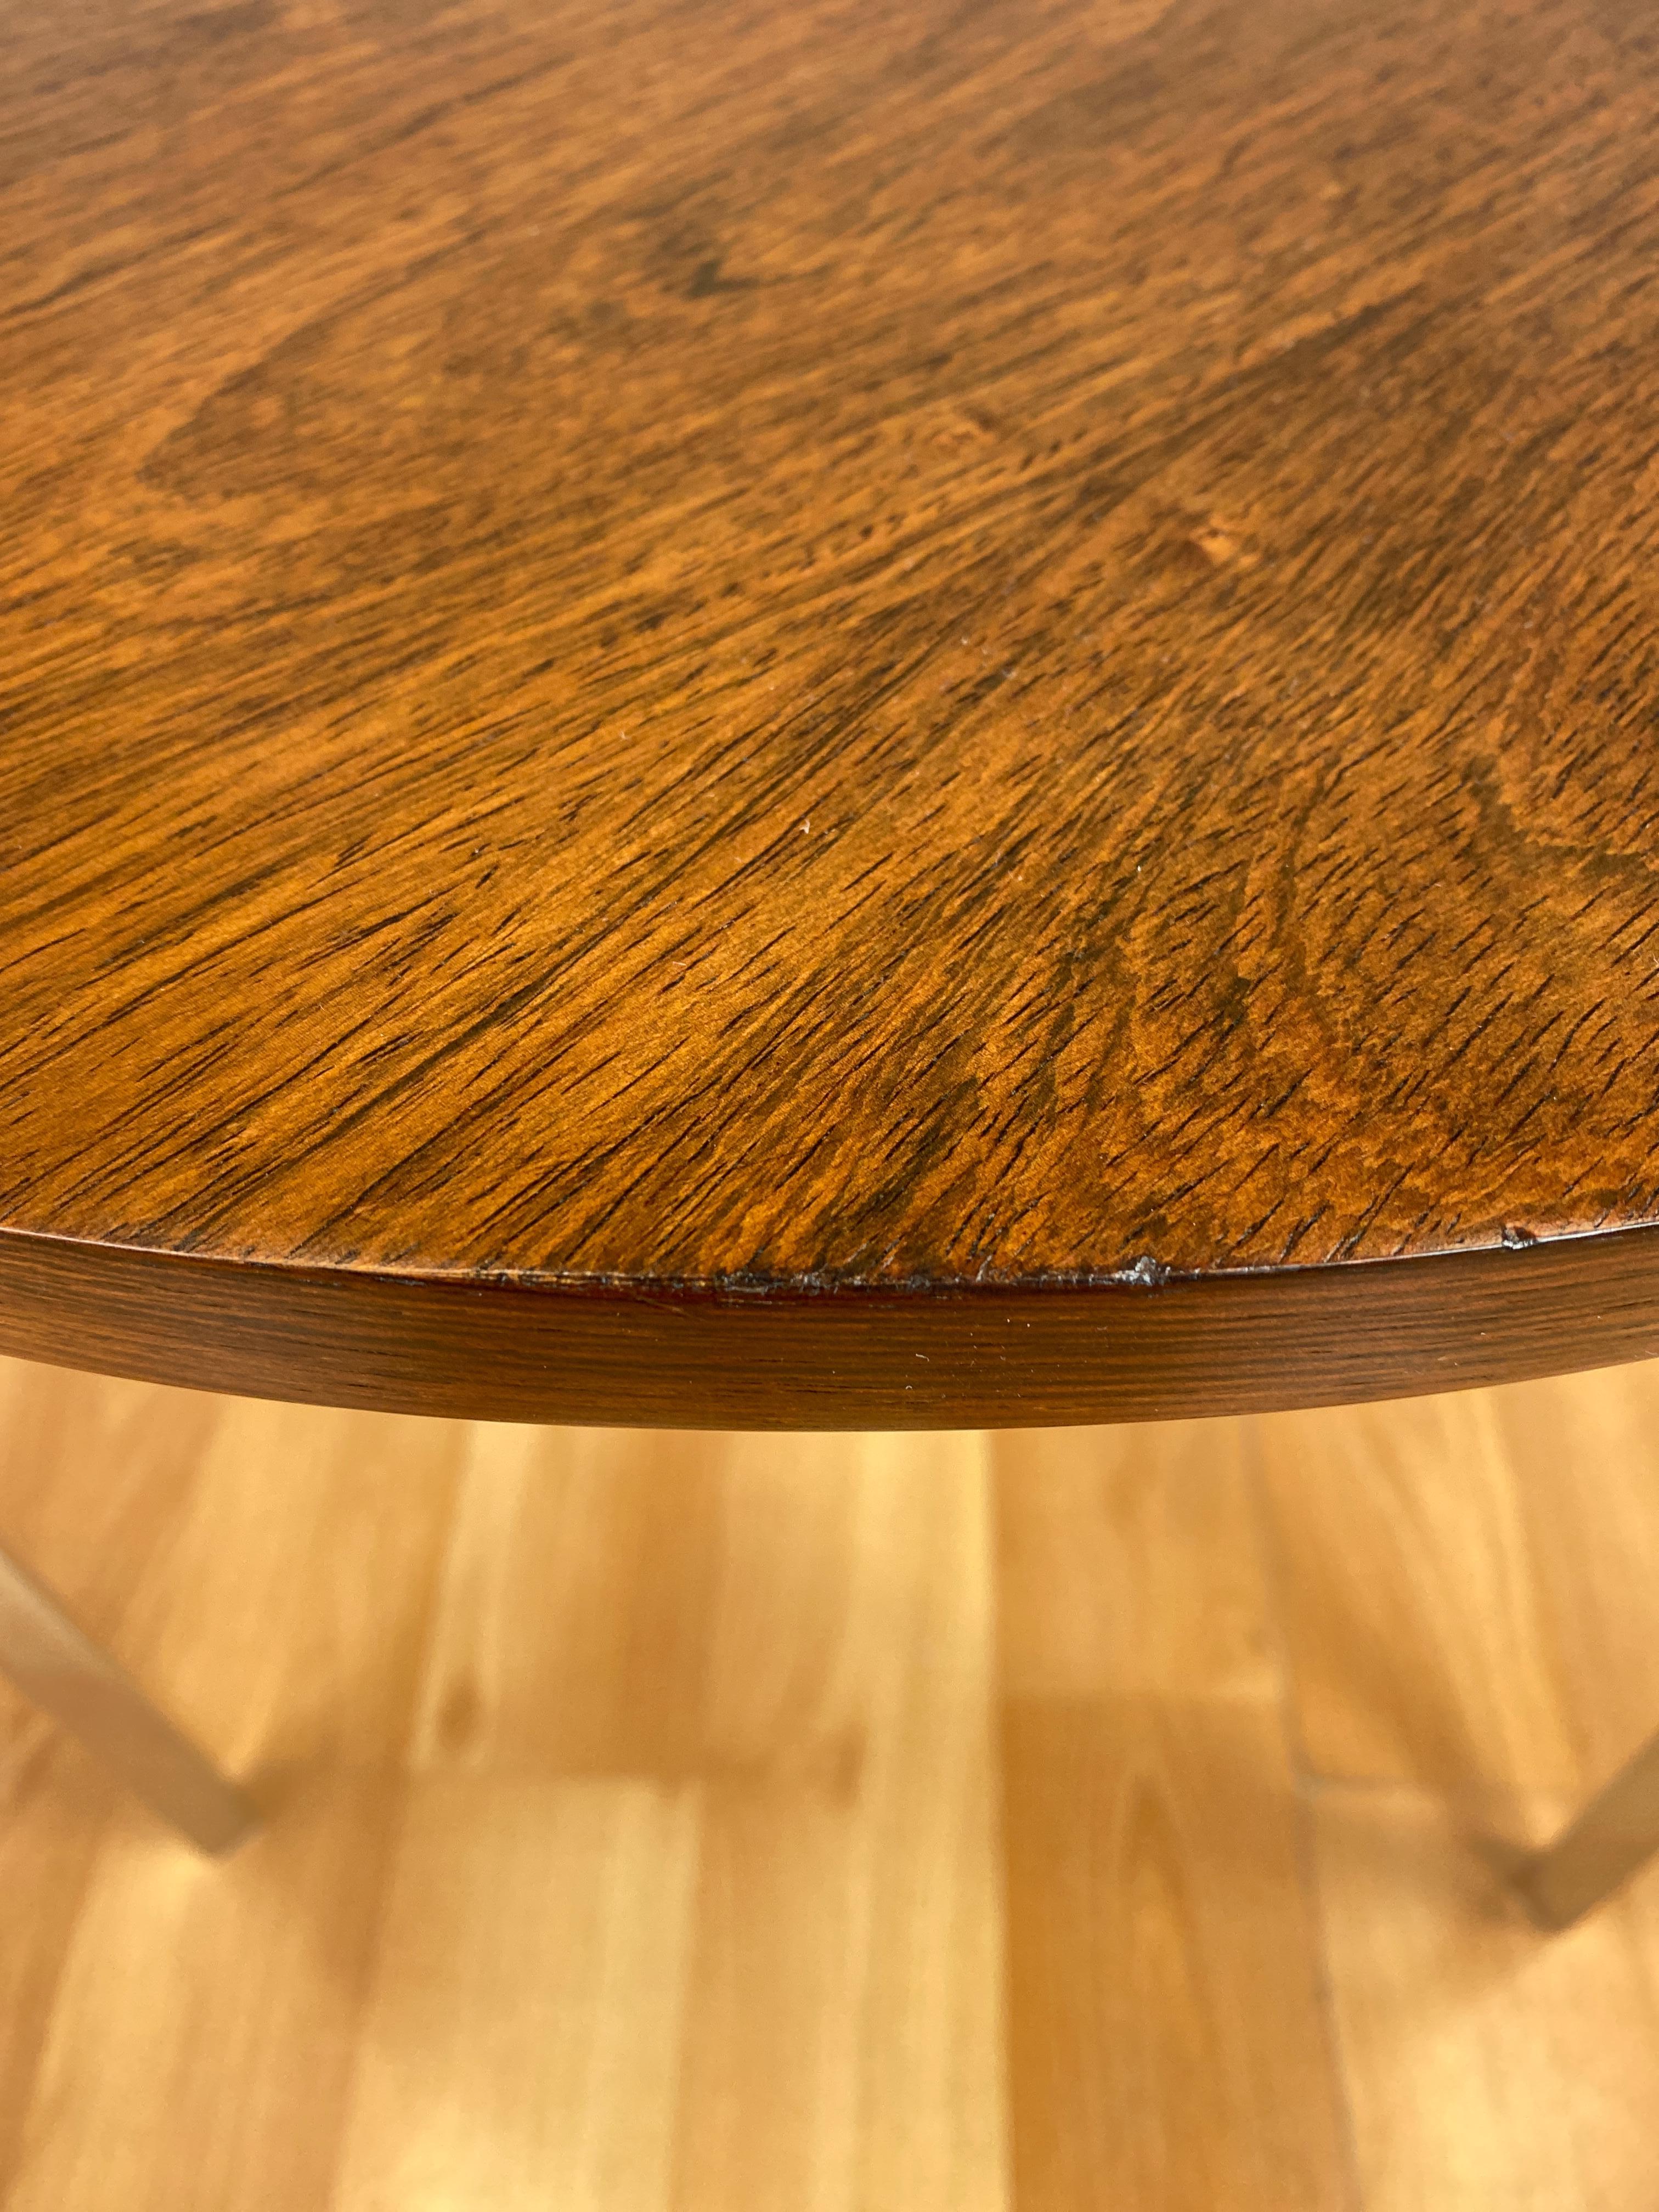 Florence Knoll for Knoll Associates Rosewood & Polished Nickel Round Side Table 3